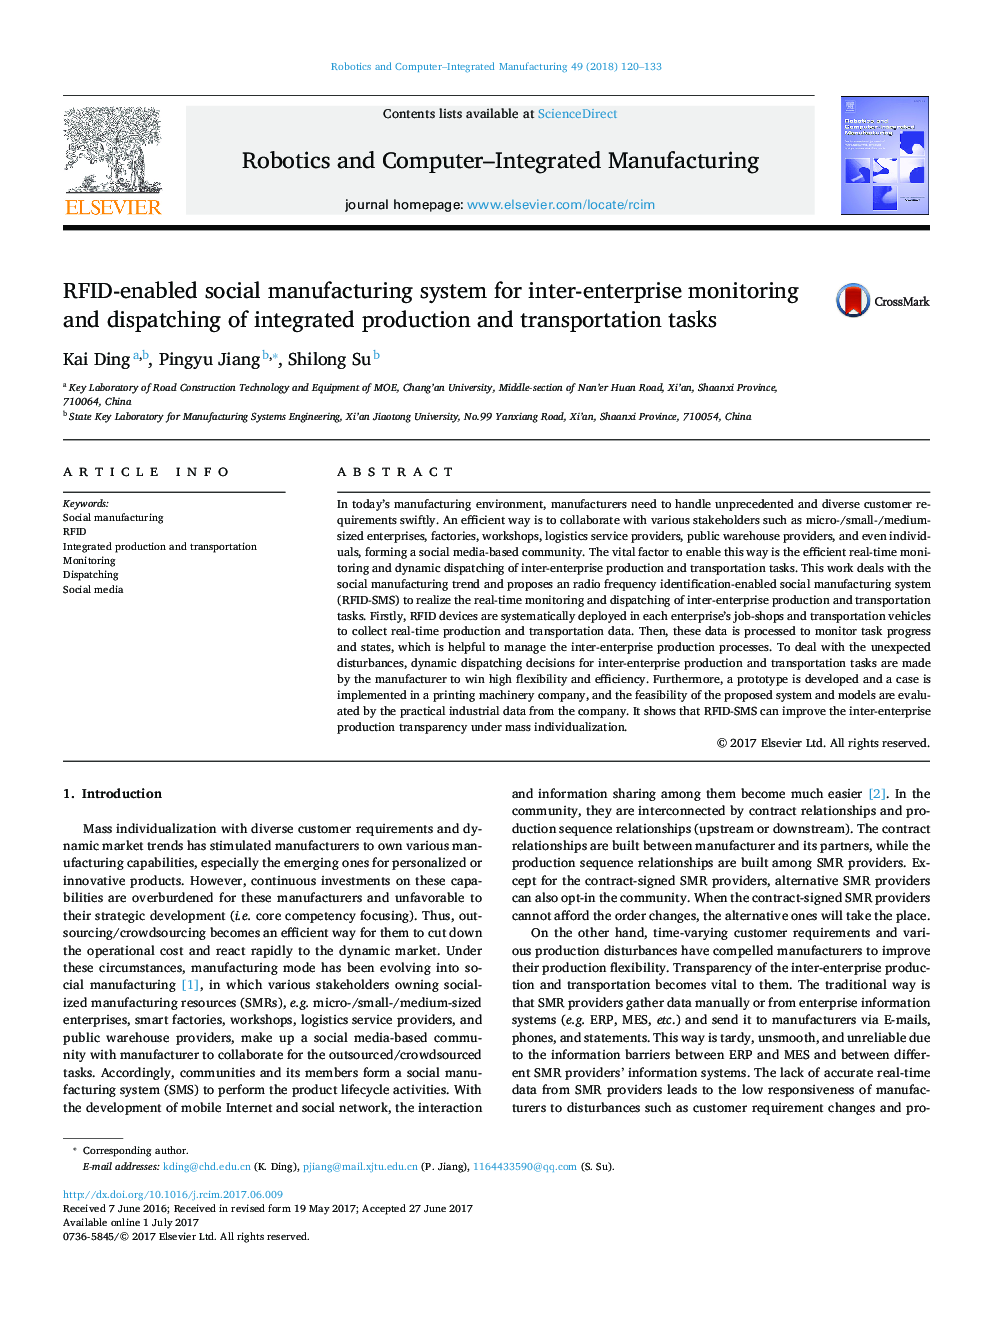 RFID-enabled social manufacturing system for inter-enterprise monitoring and dispatching of integrated production and transportation tasks